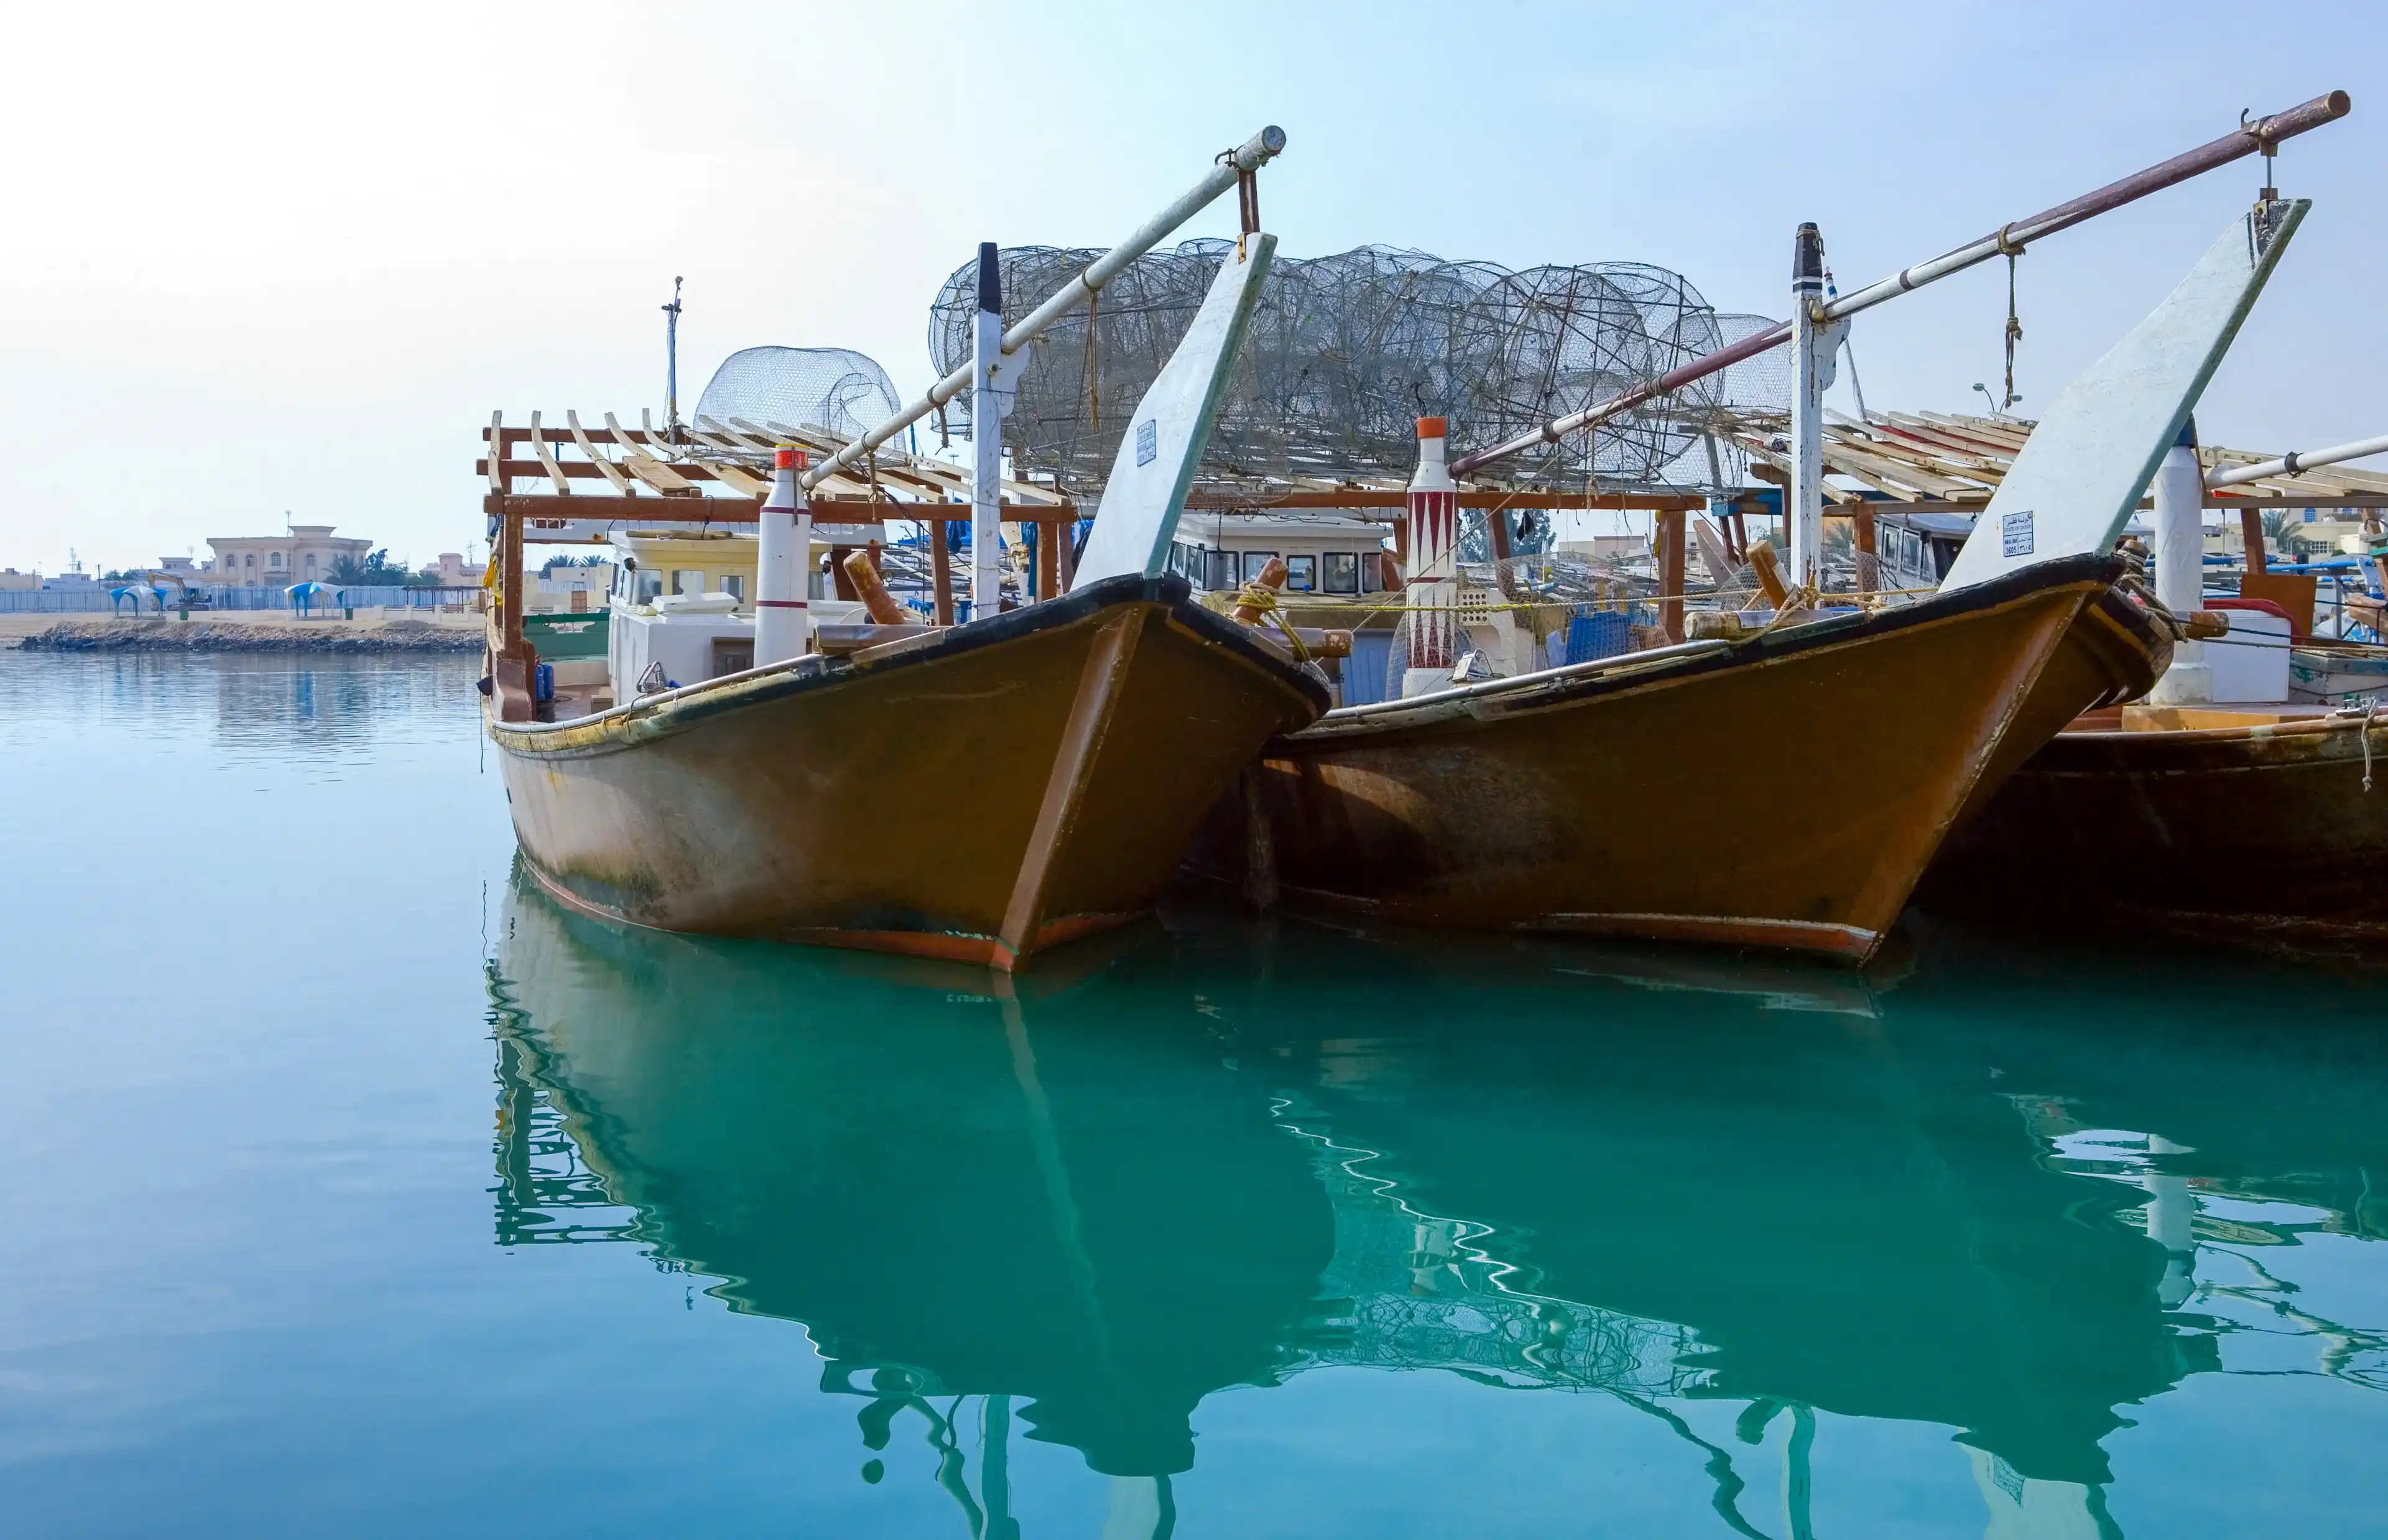 Qatar, Al Khor, the typical Dhow boats in the harbor